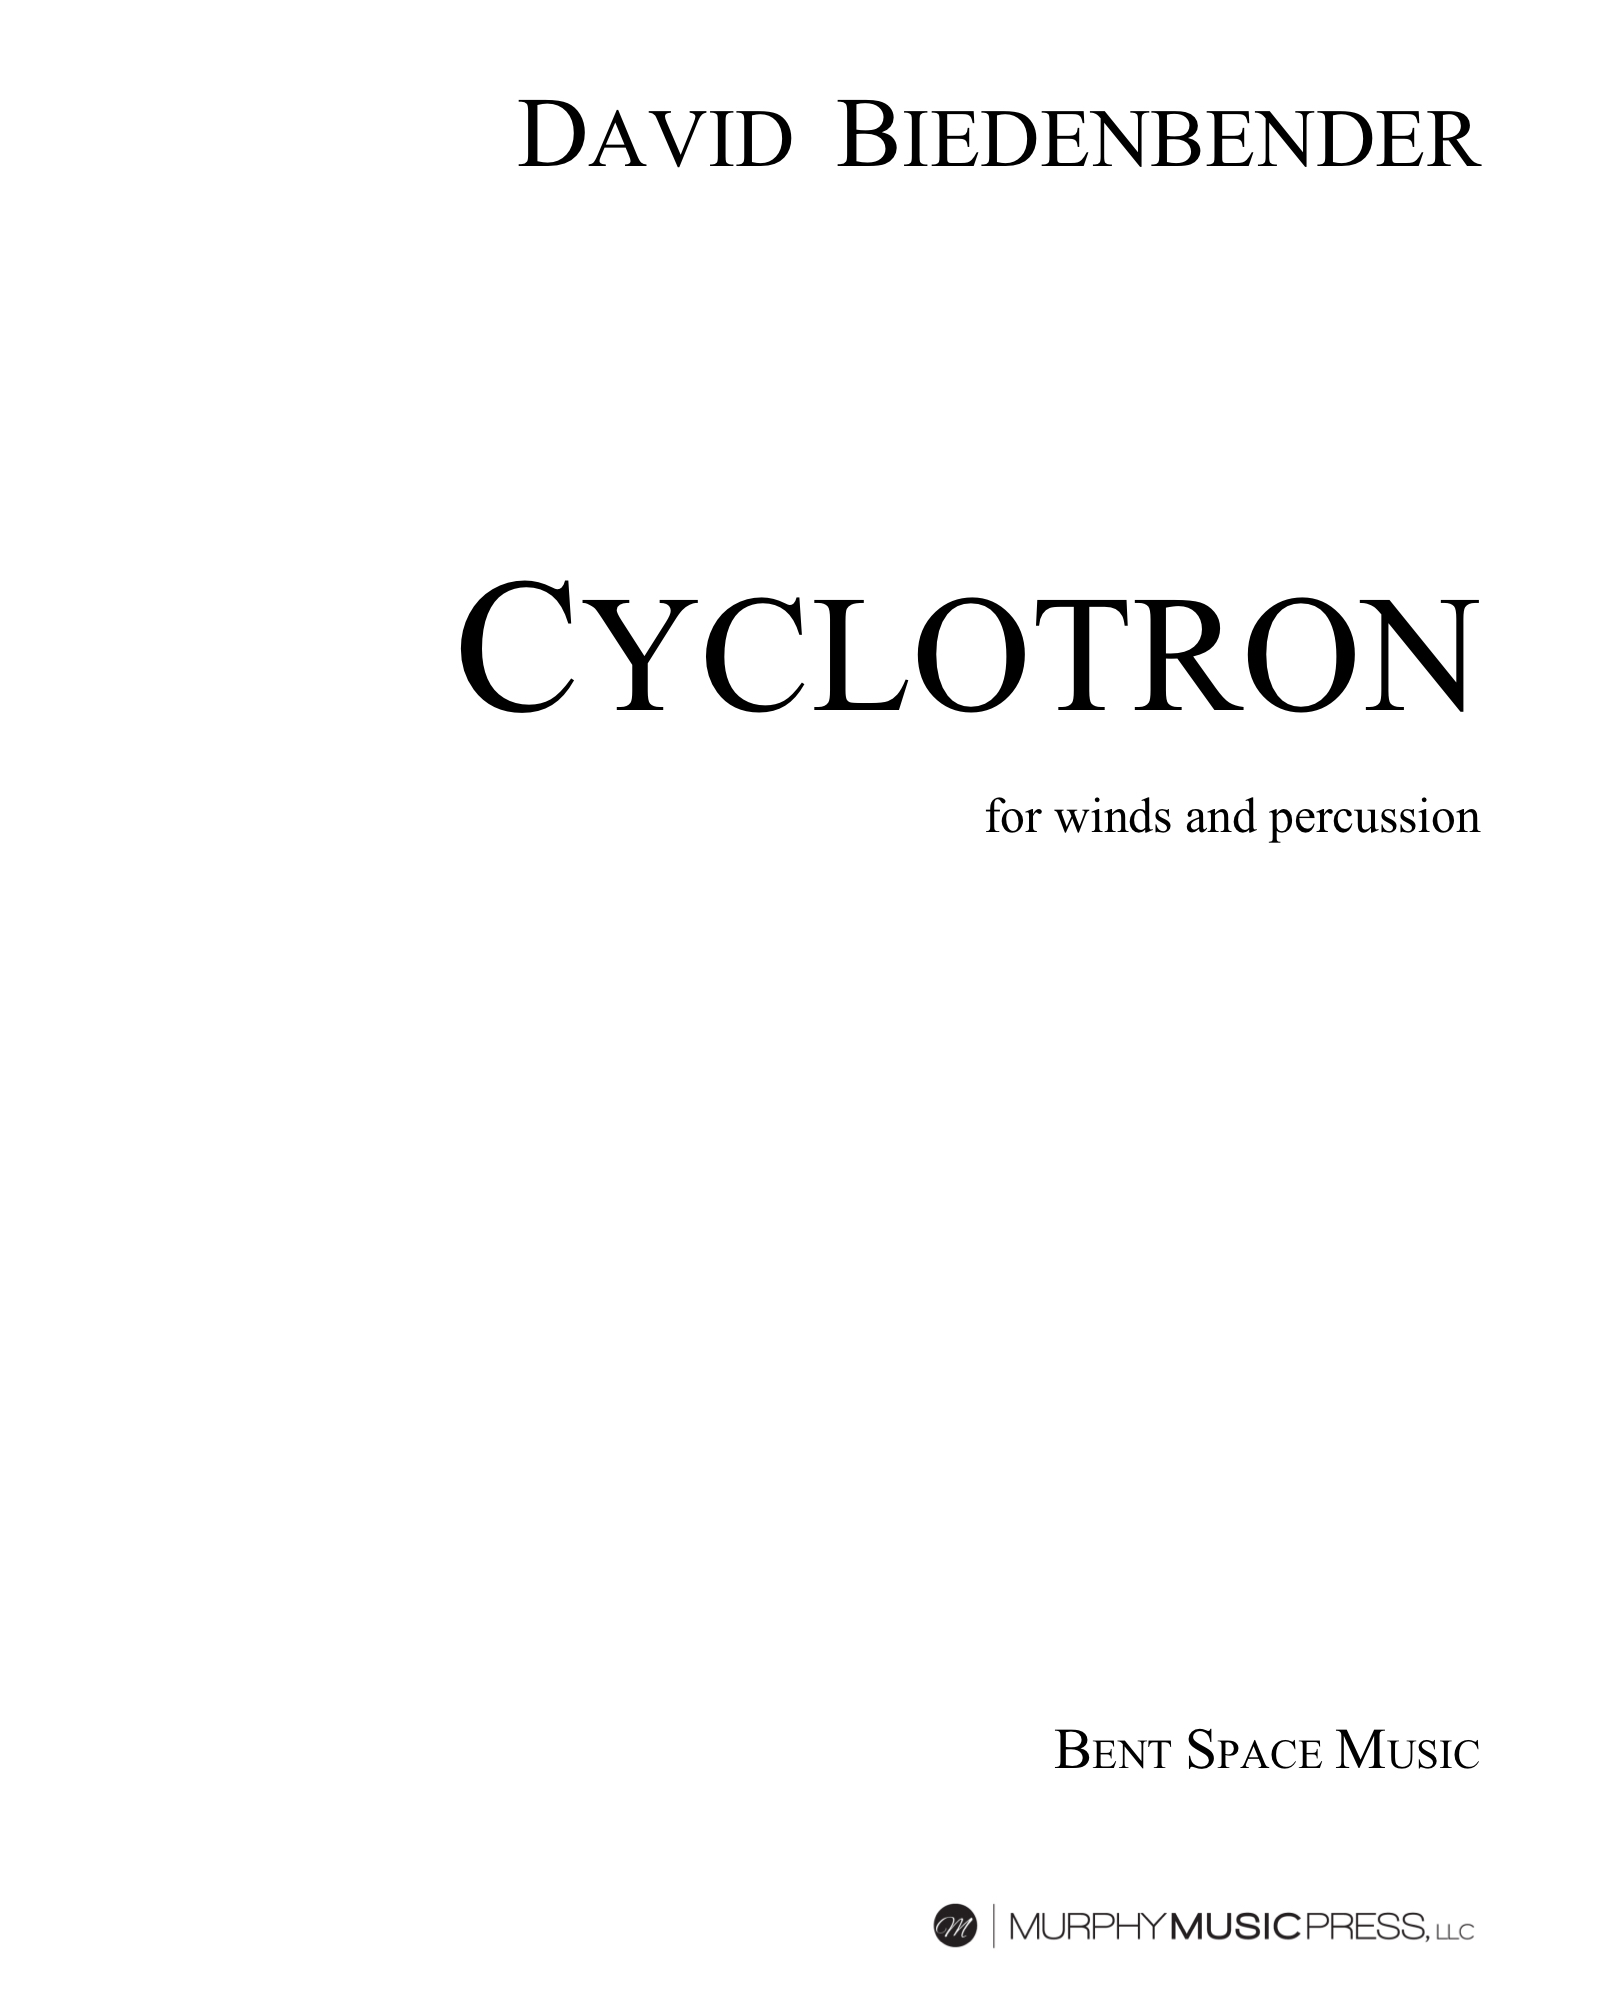 Cyclotron (Parts Rental Only) Additional Performances $125 by David Biedenbender 